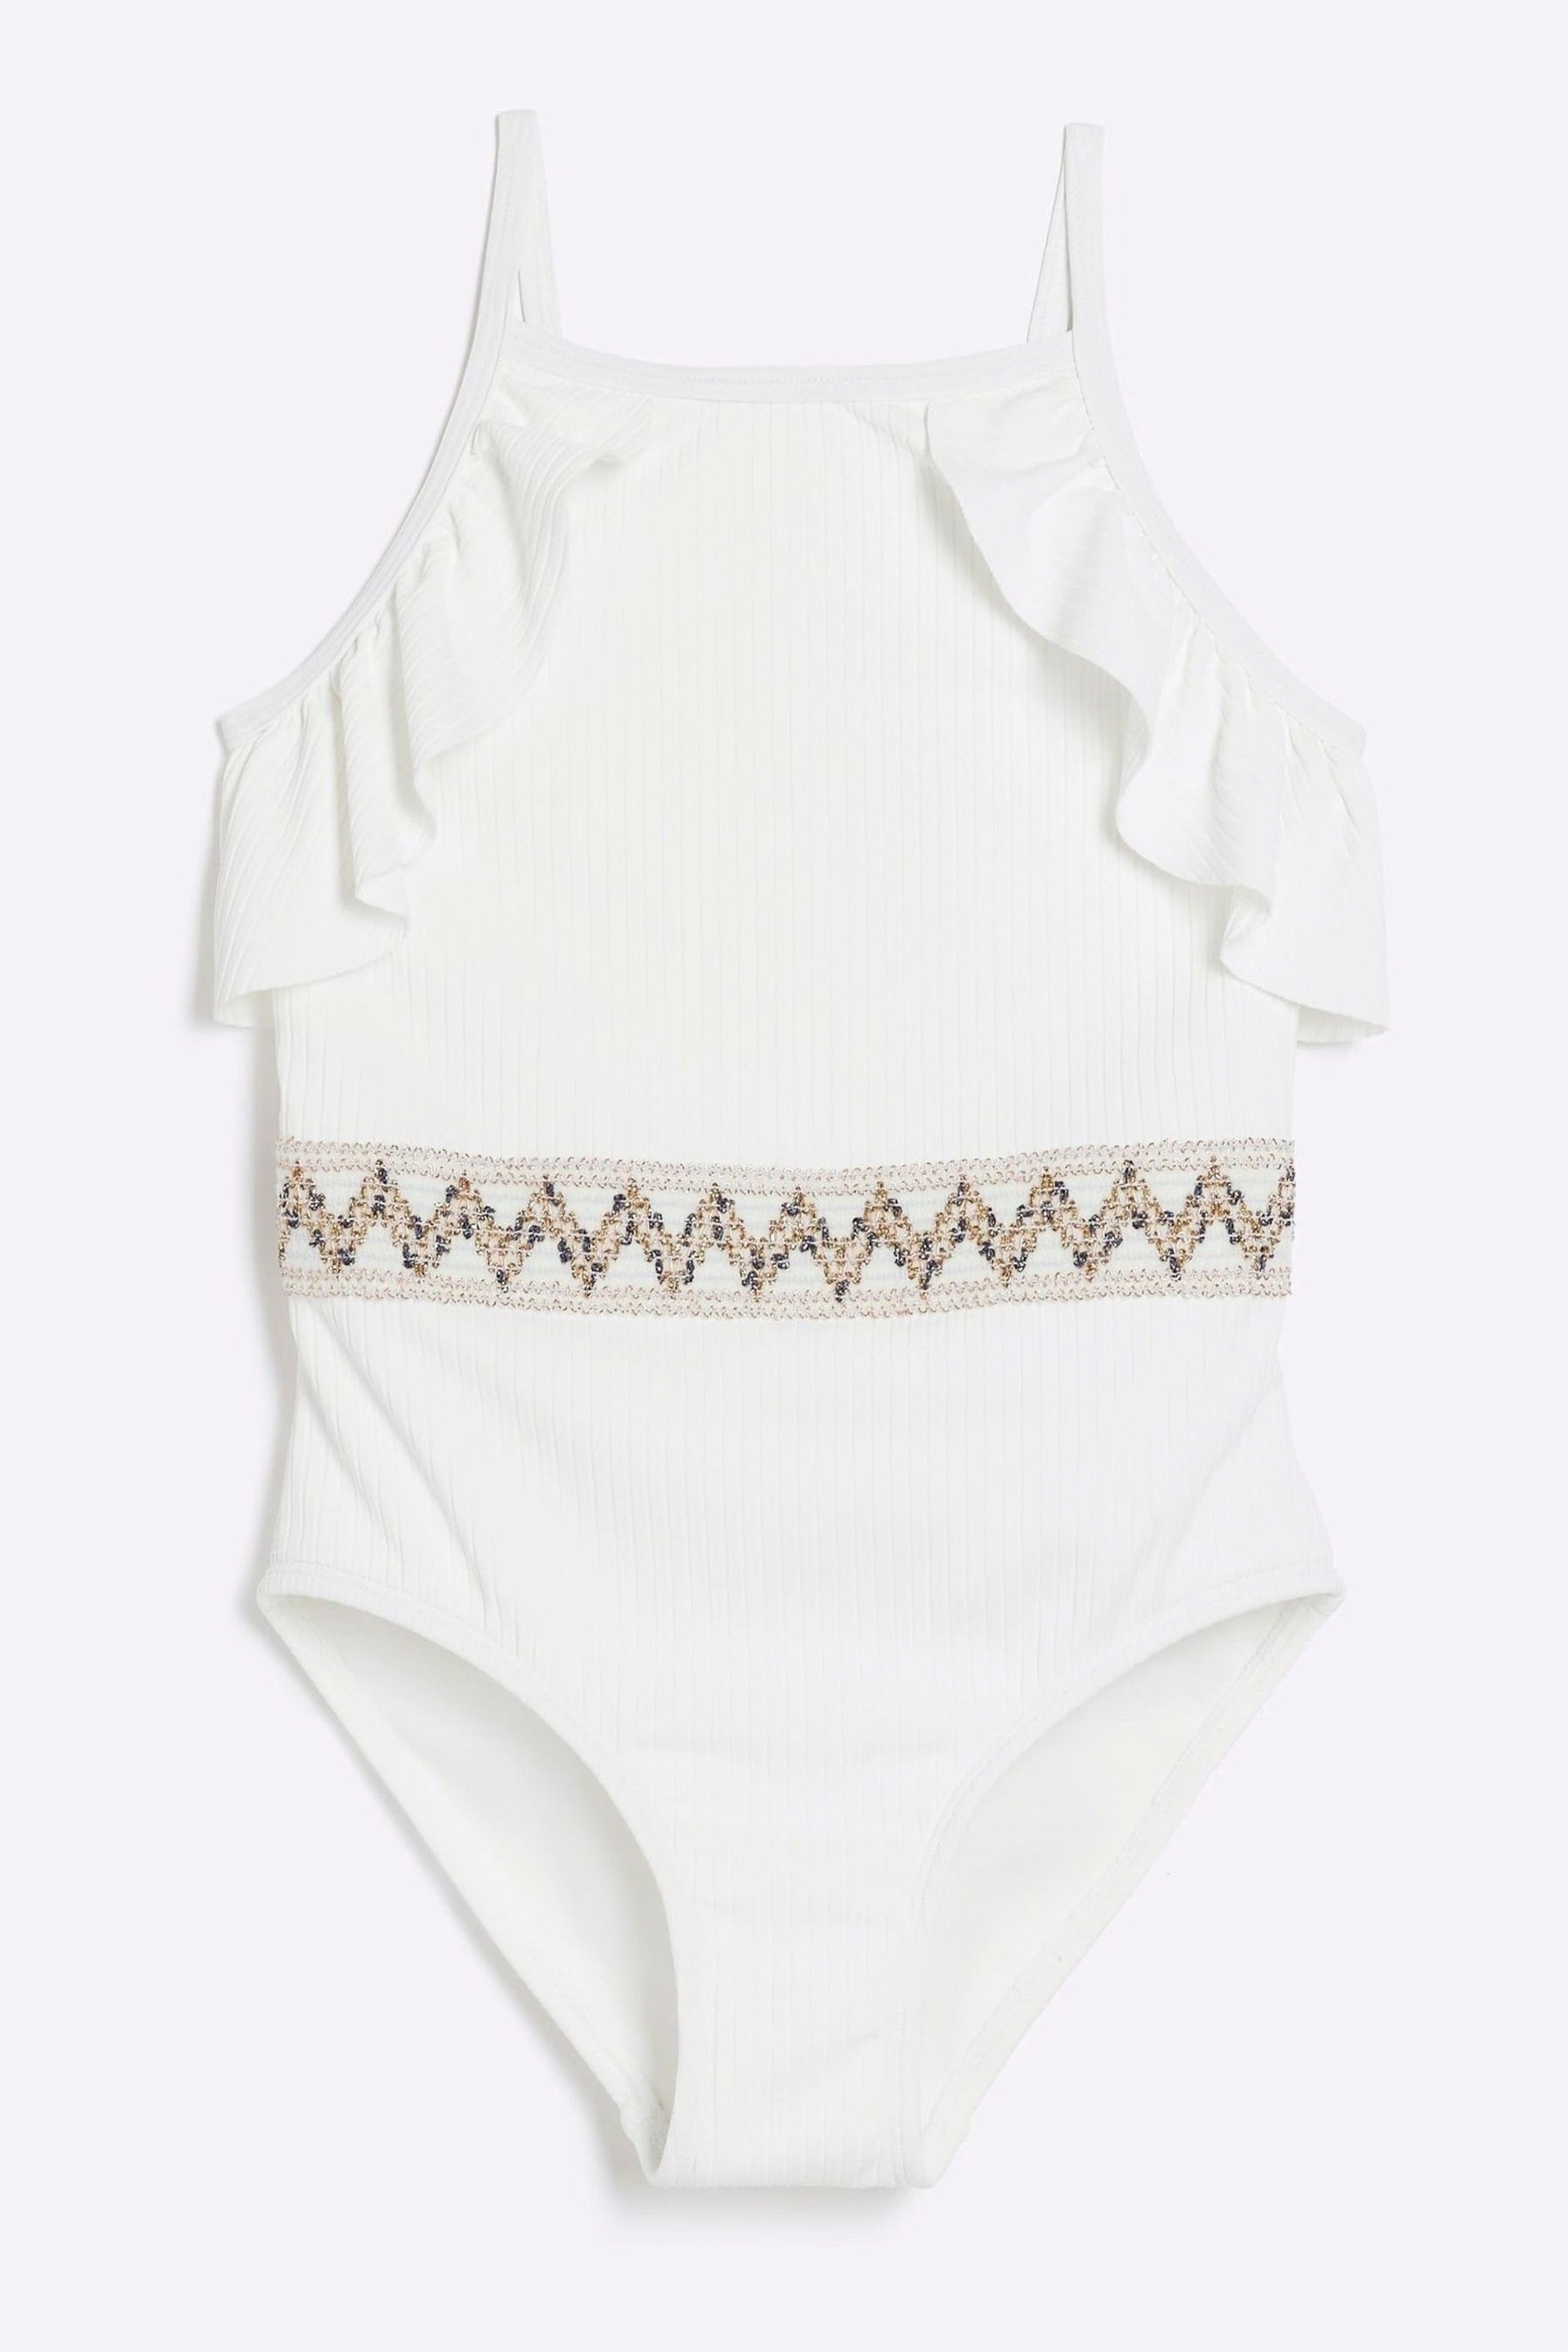 River Island White Girls Ombre Glitter Swimsuit - Image 2 of 6